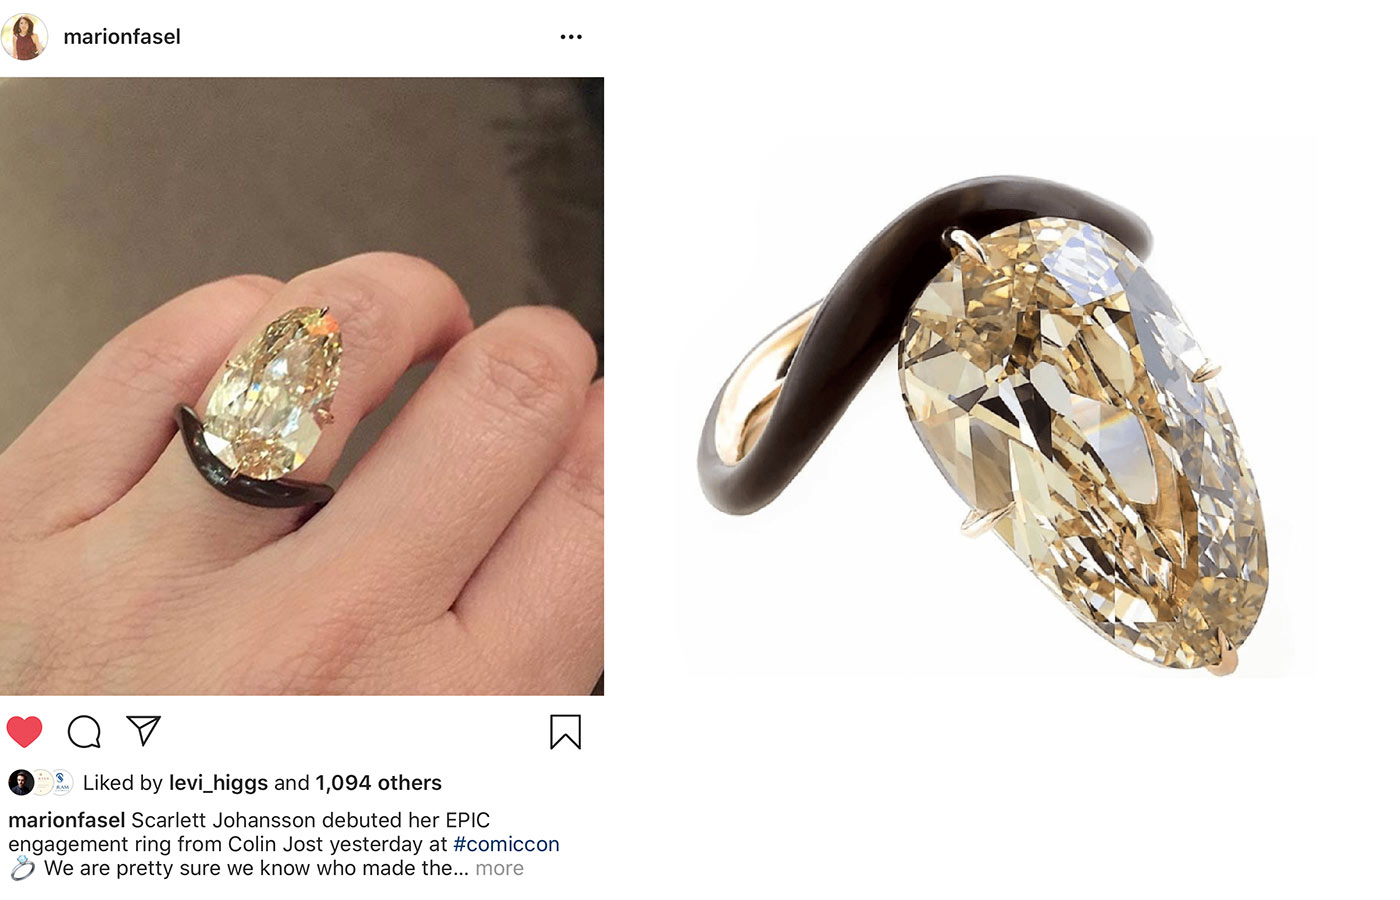 Author Marion Fasel highlights a ring by Taffin designer James de Givenchy, which is similar to a light brown diamond engagement ring worn by Hollywood actress Scarlett Johansson